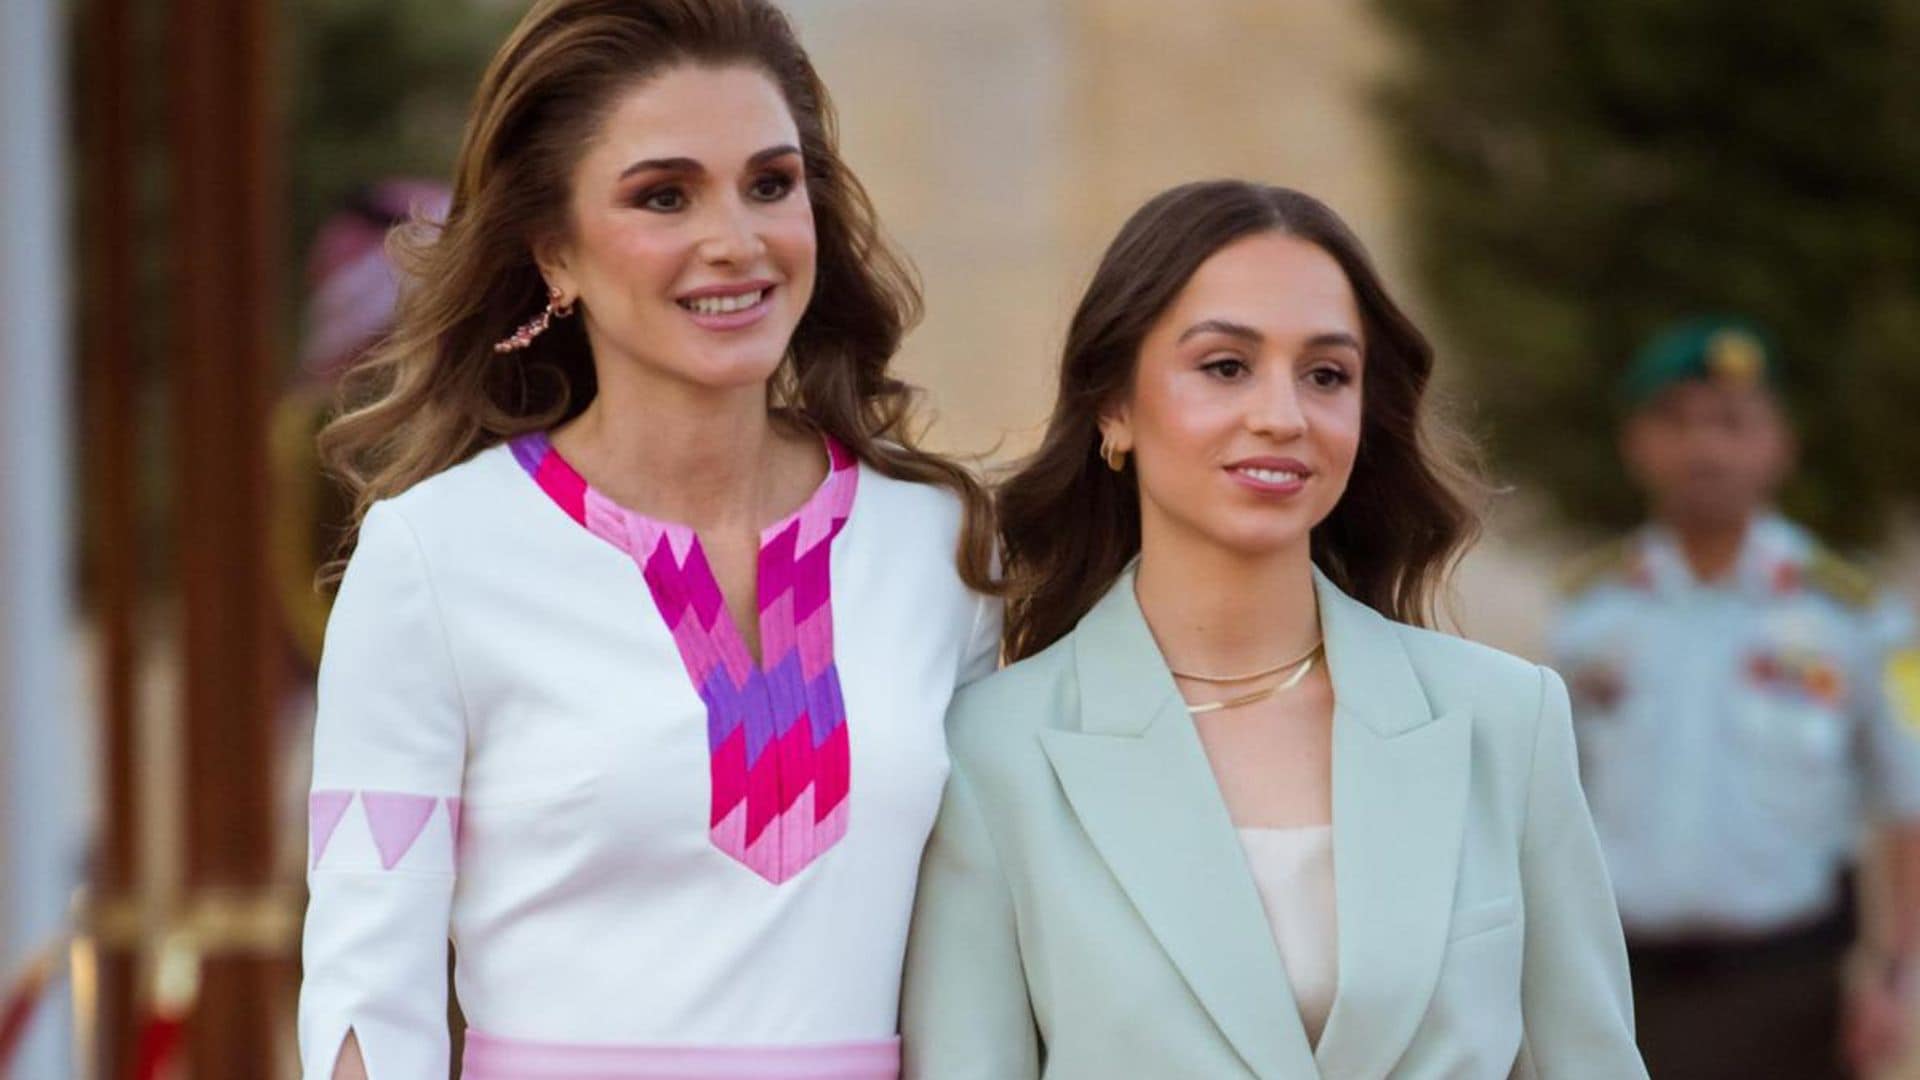 Mother of the bride Queen Rania shares photo of daughter ahead of henna party